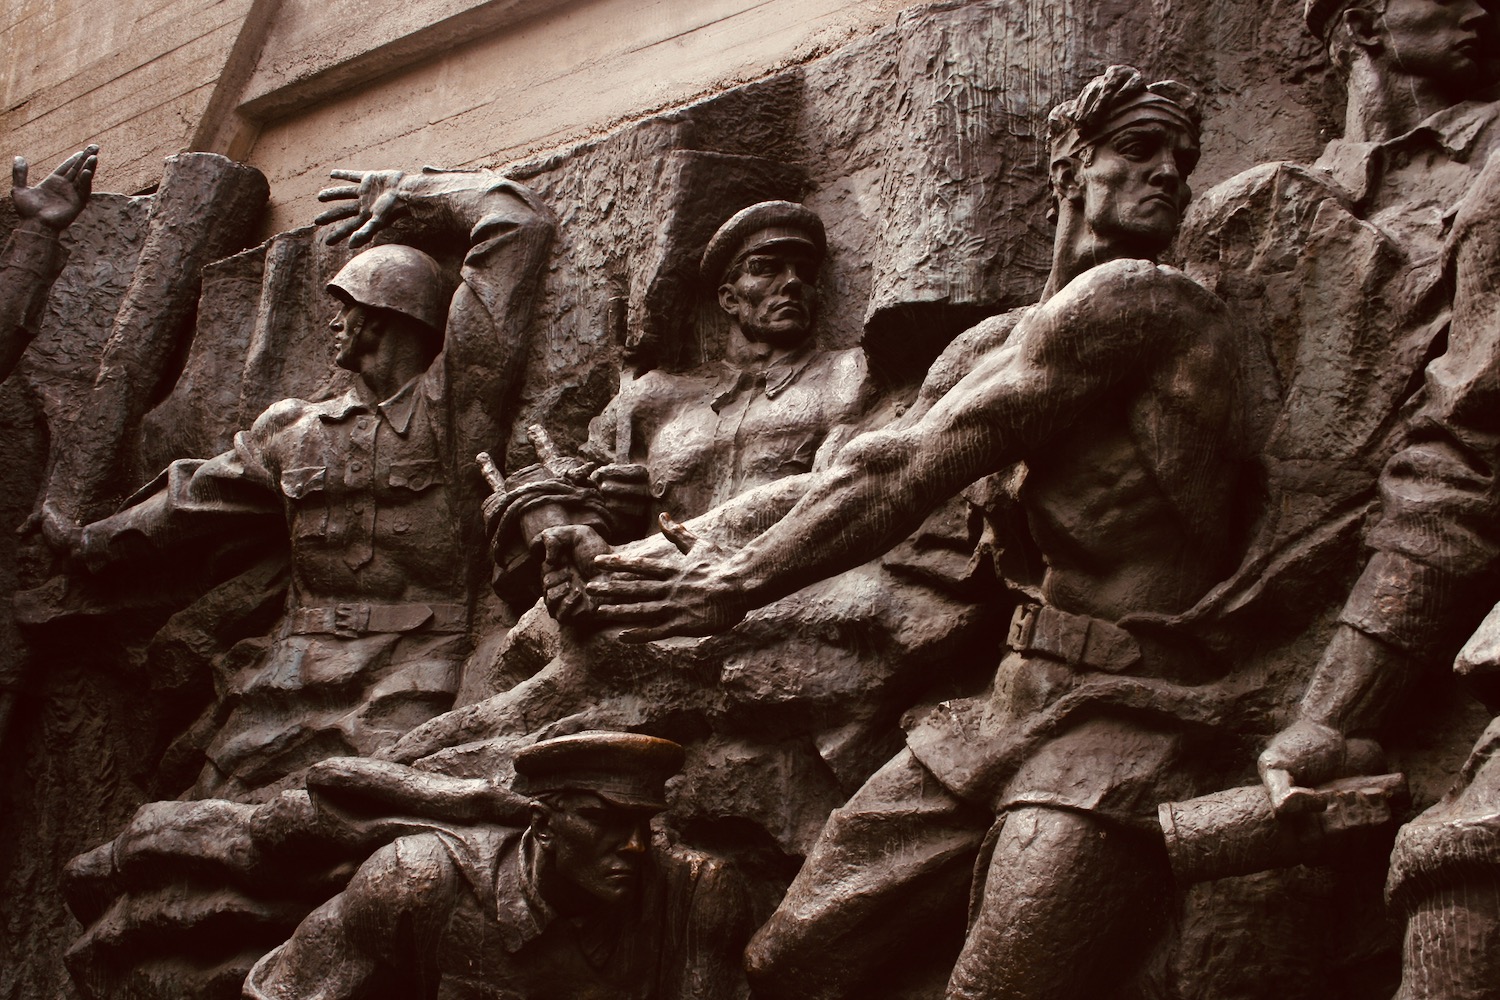 a statue of men in military uniforms